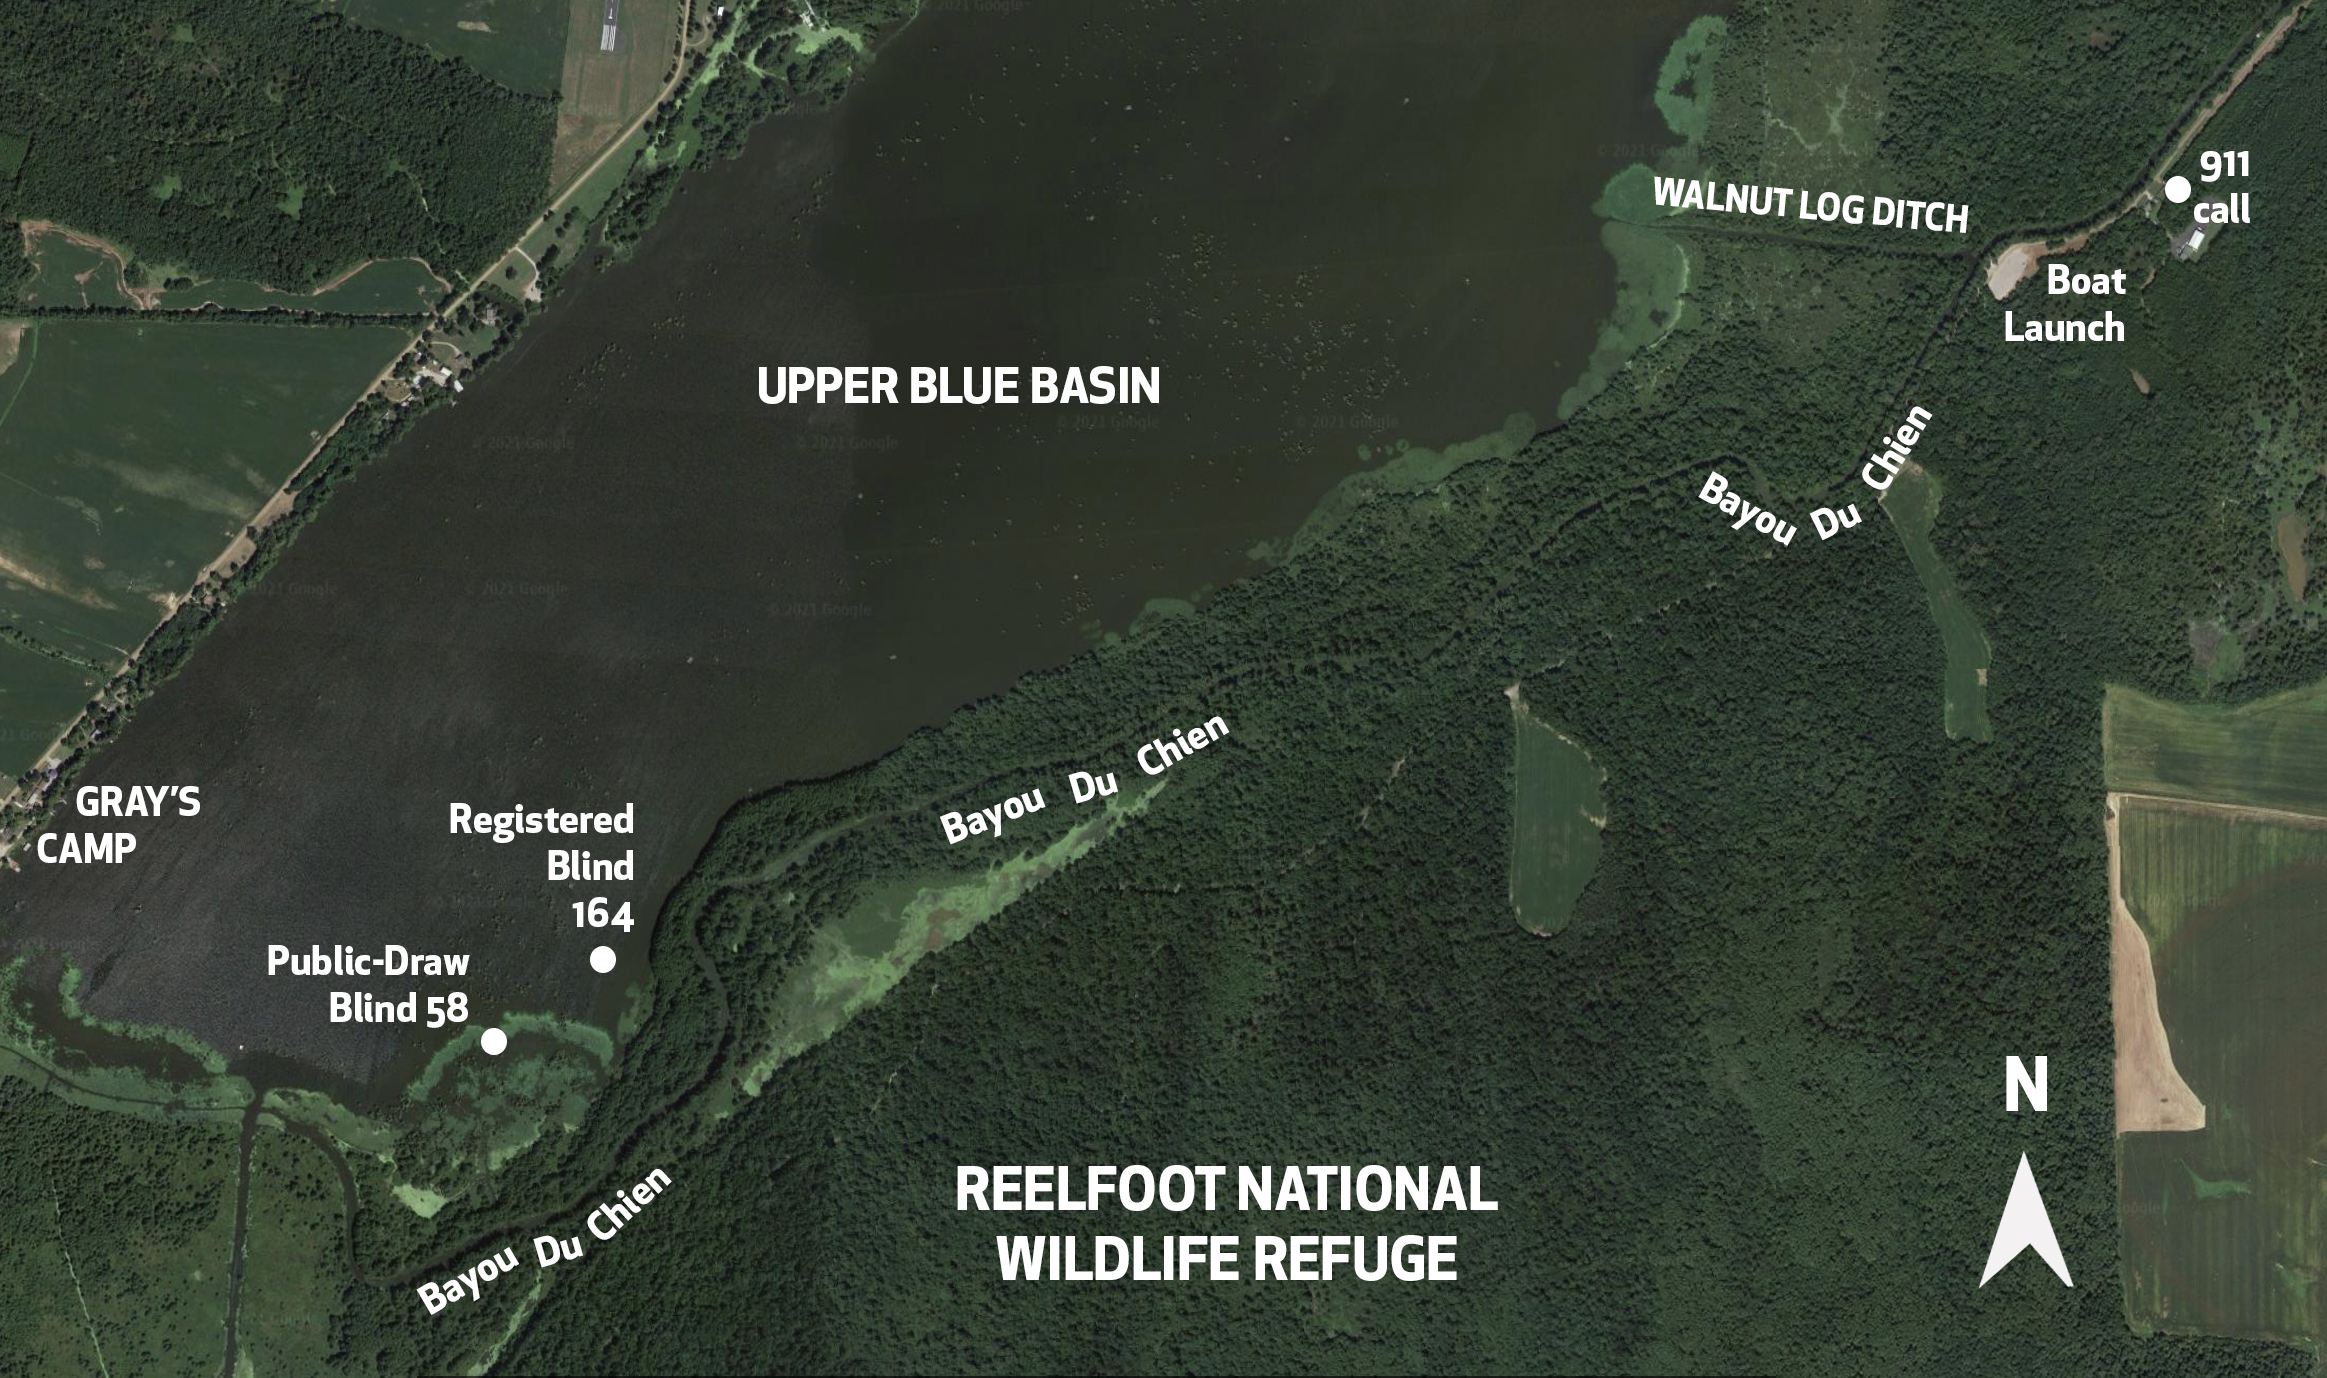 A map of what happened at Reelfoot Lake, Upper Blue Basin